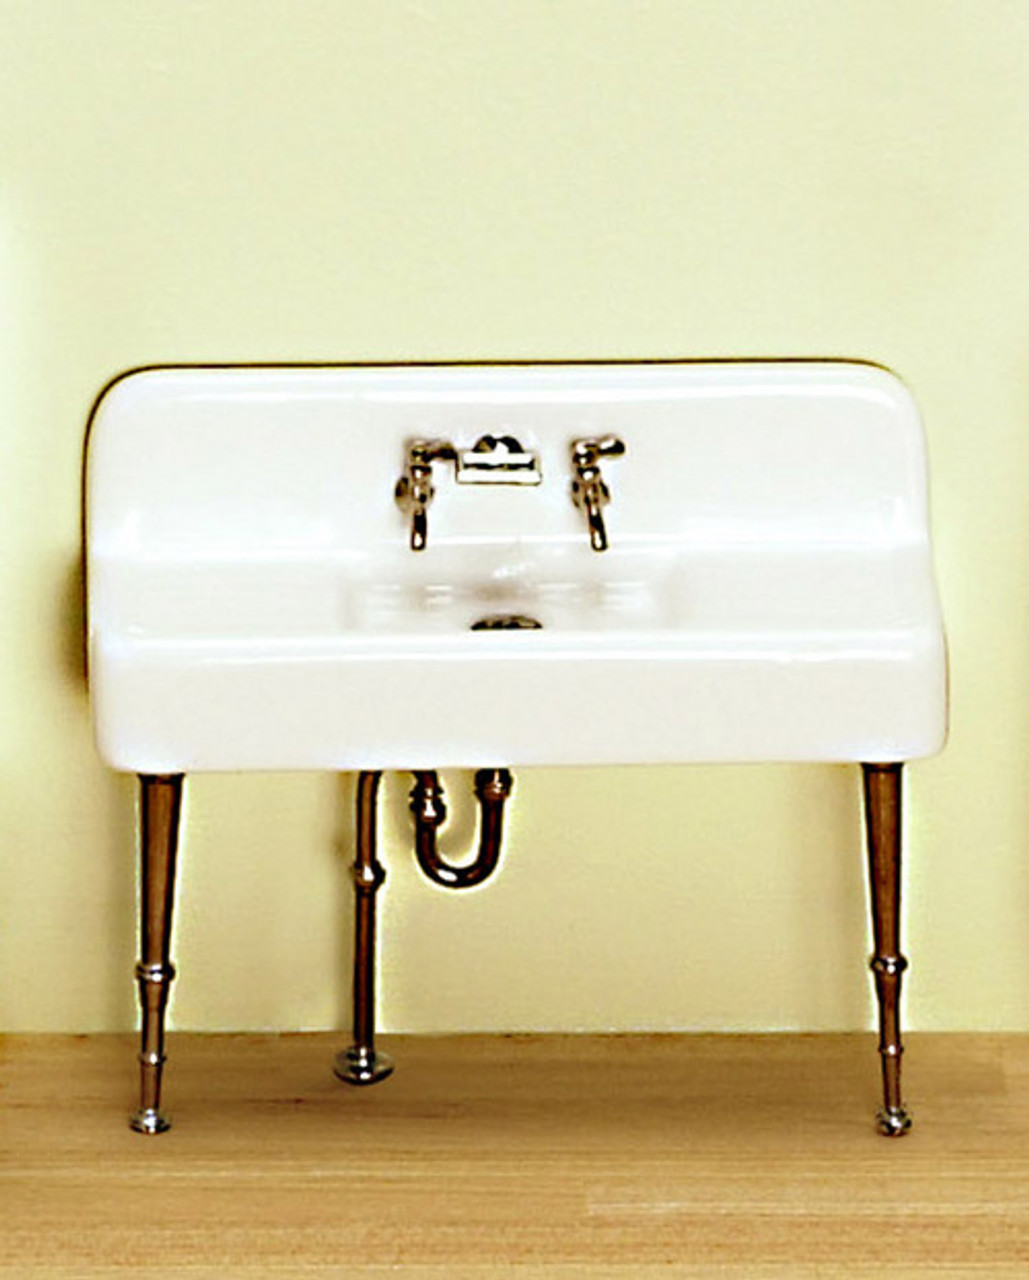 Kitchen Sink- Porcelain and White